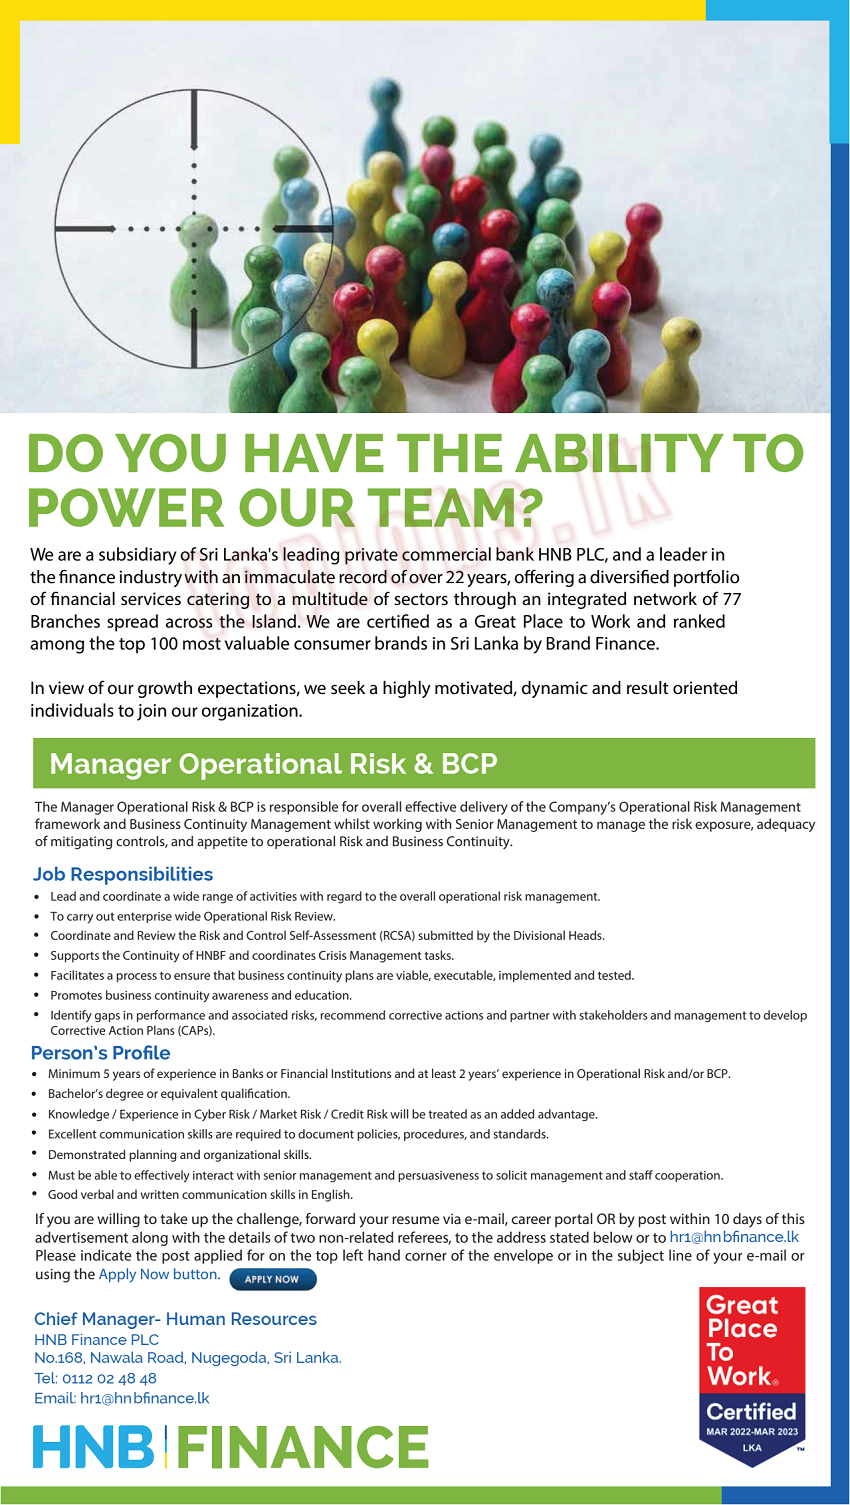 Manager Operational Risk & BCP